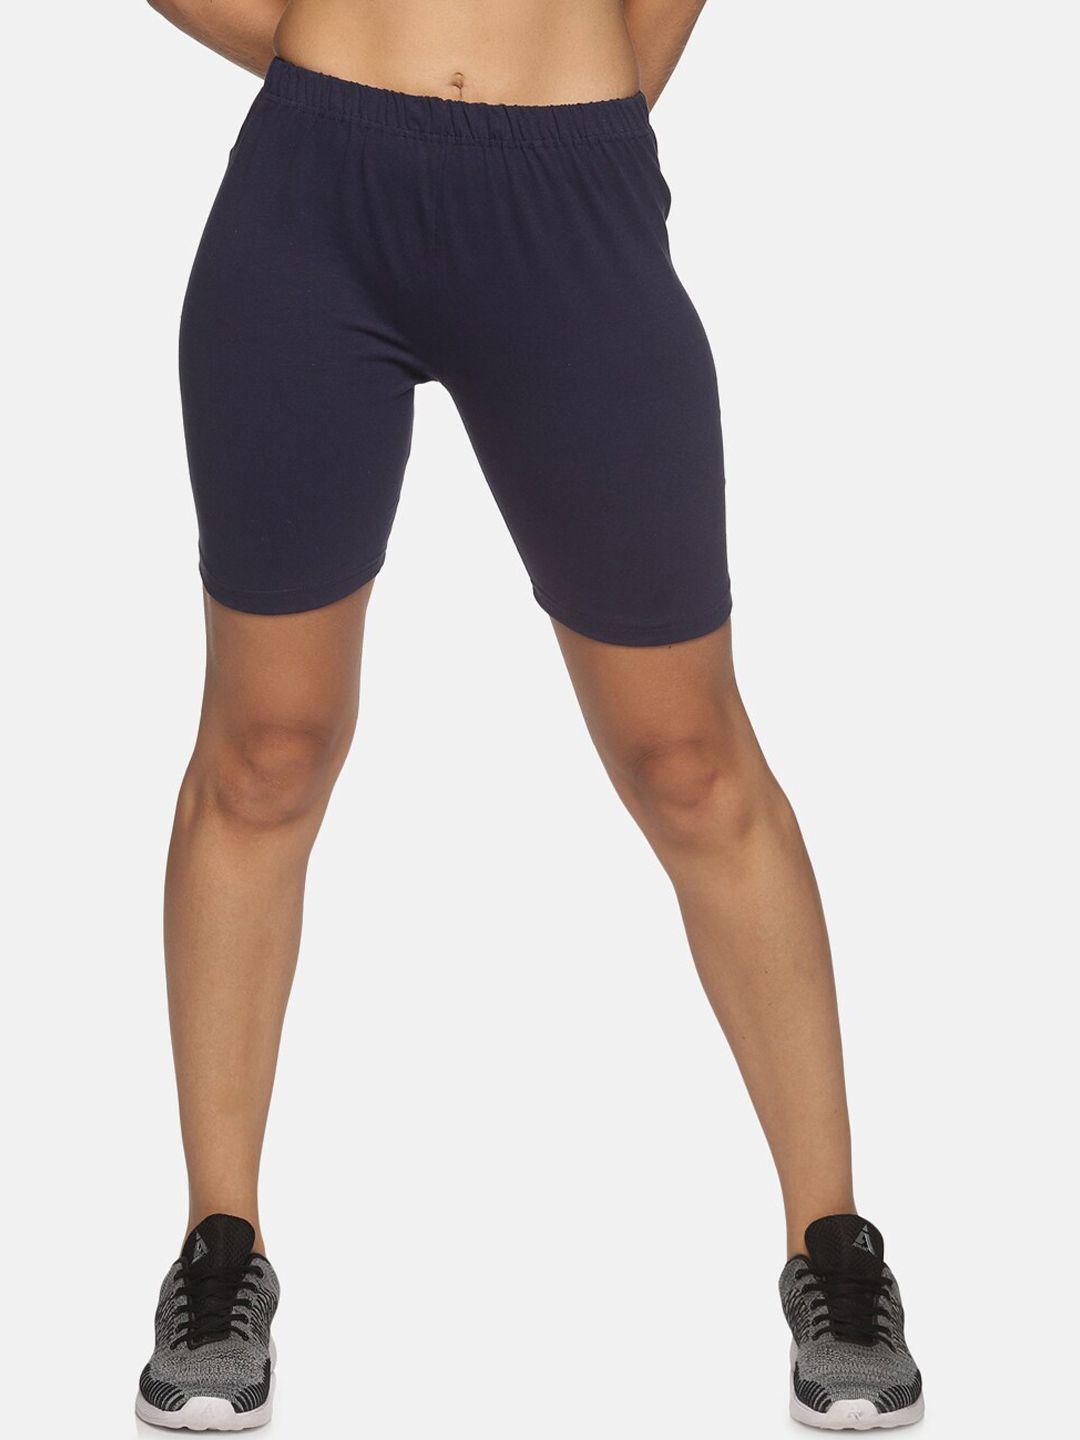 NOT YET by us Women Navy Blue Slim Fit Outdoor Sports Shorts